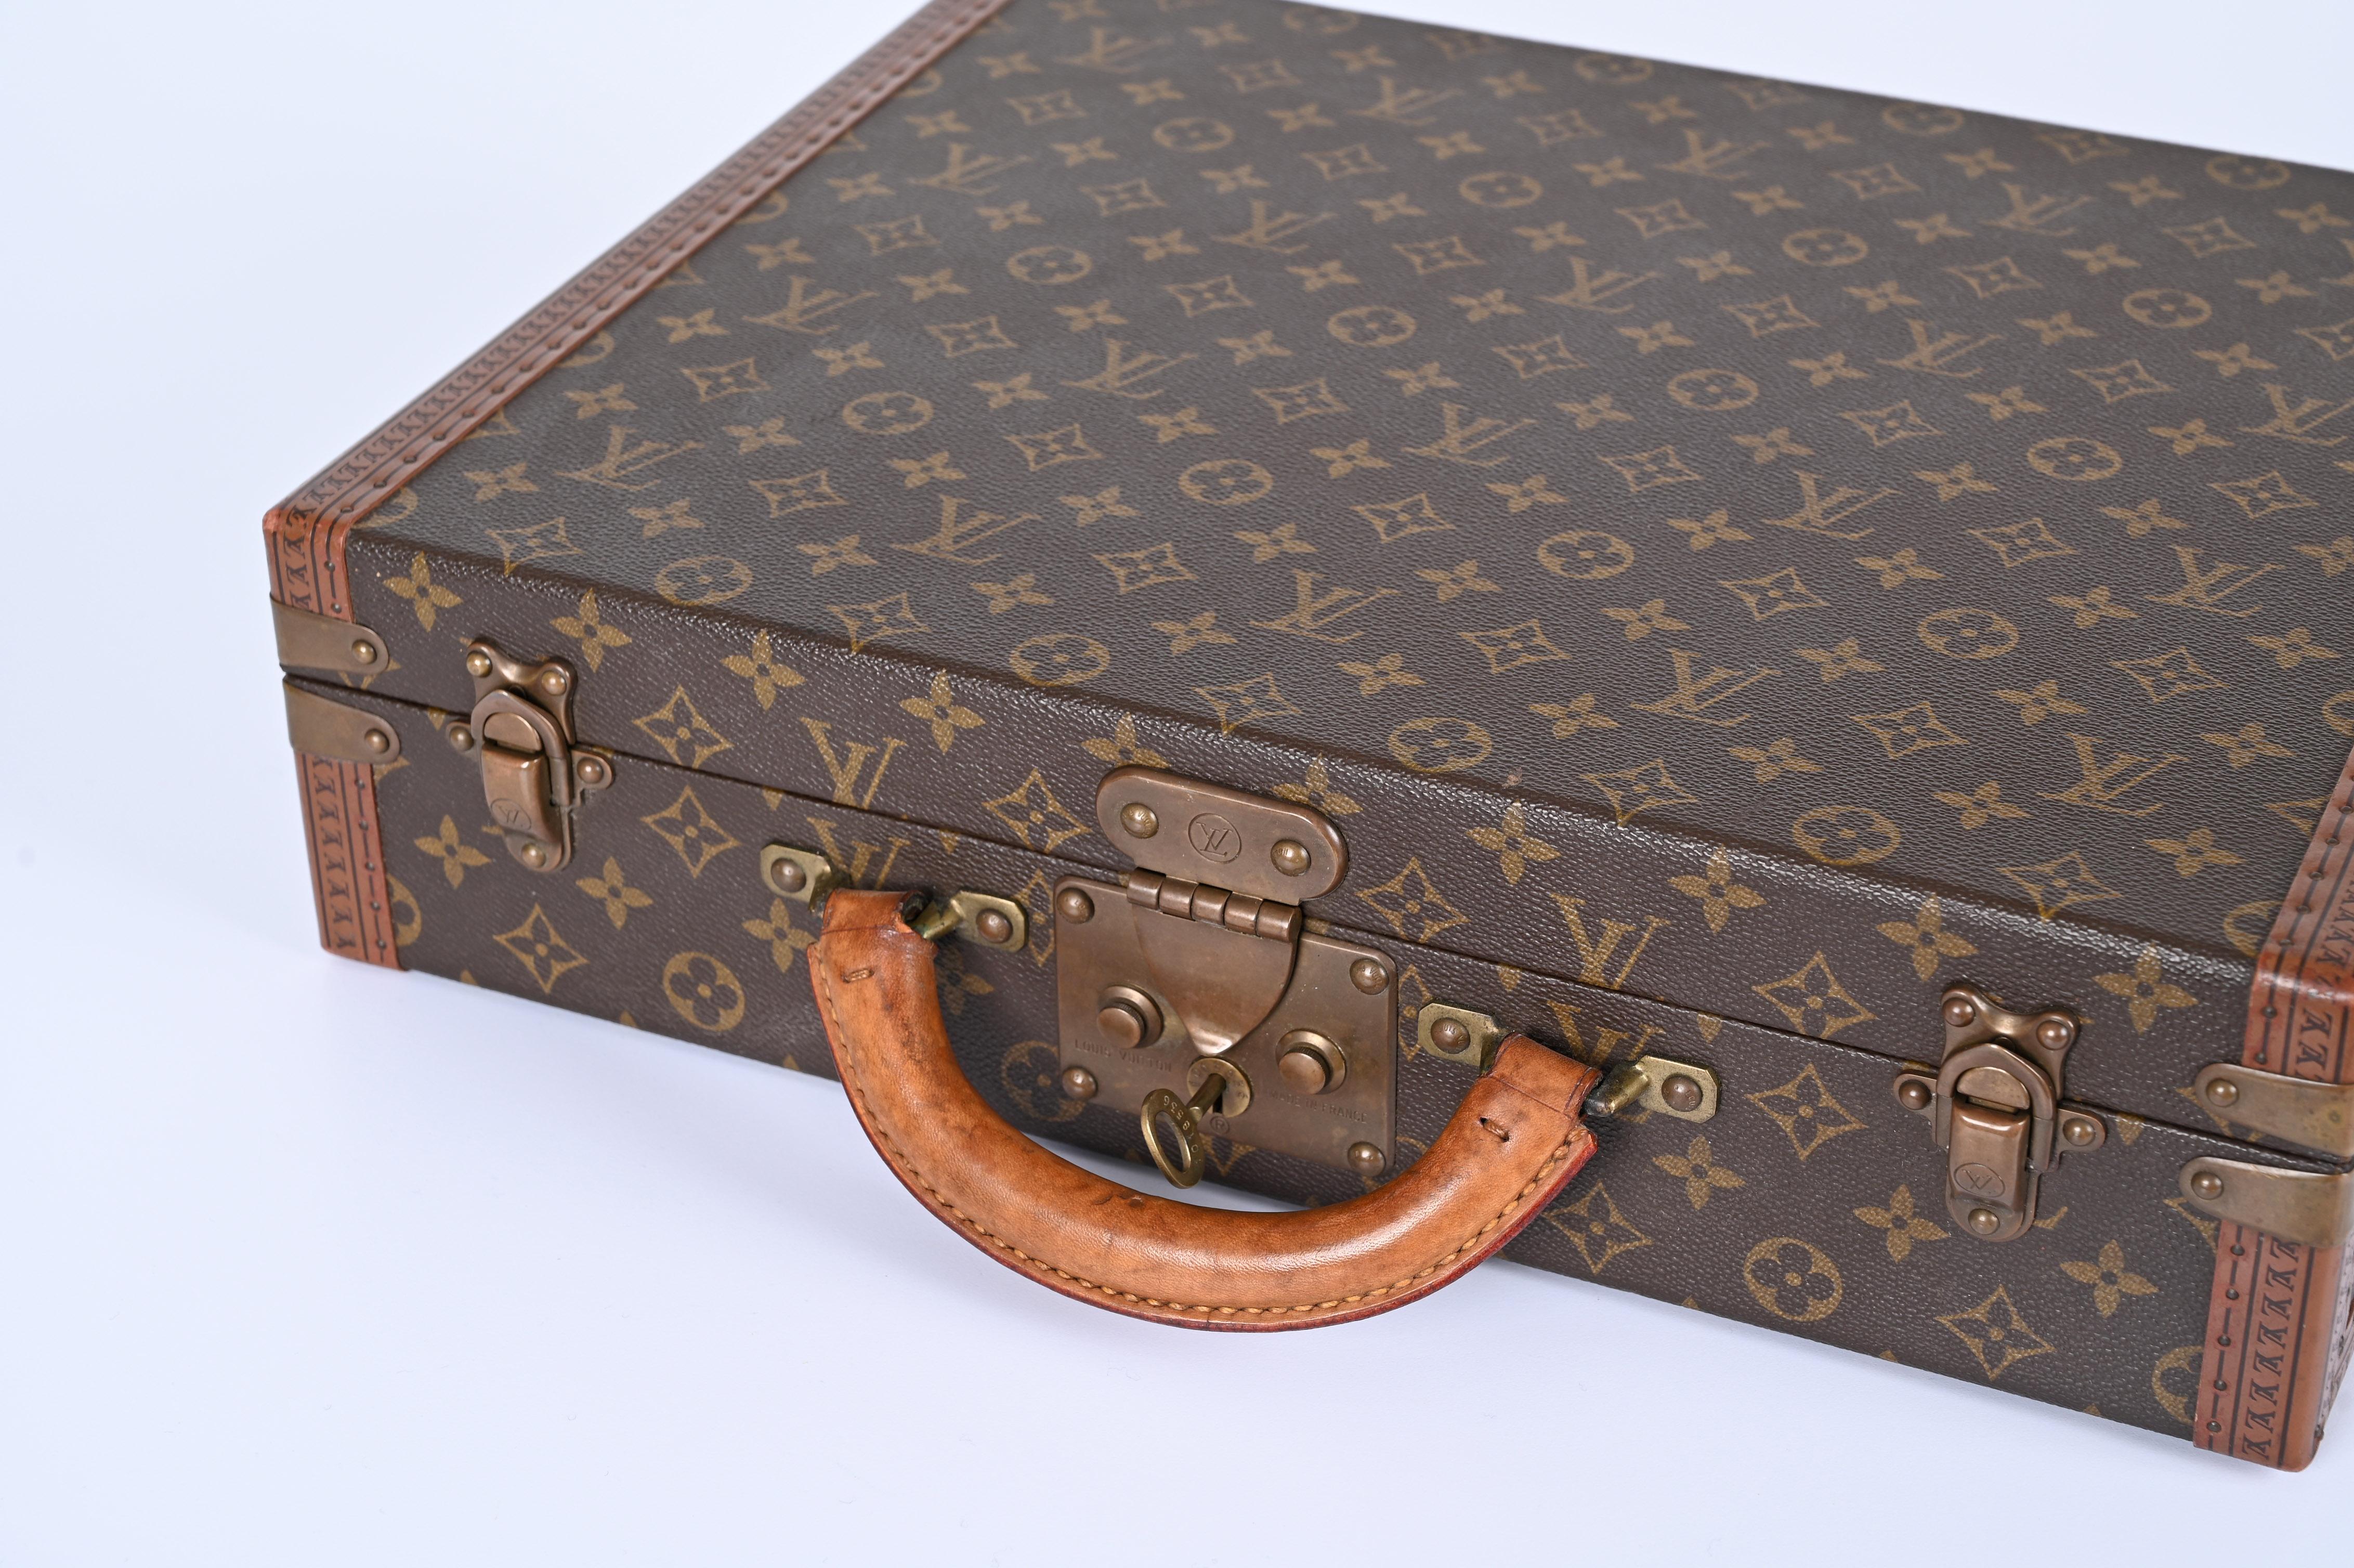 Stunning original midcentury vintage Louis Vuitton briefcase. This iconic item was designed in France during the 1980s.

This spectacular trunk case features the paradigmatic monogram canvas with beautiful leather trims with the LV logo all